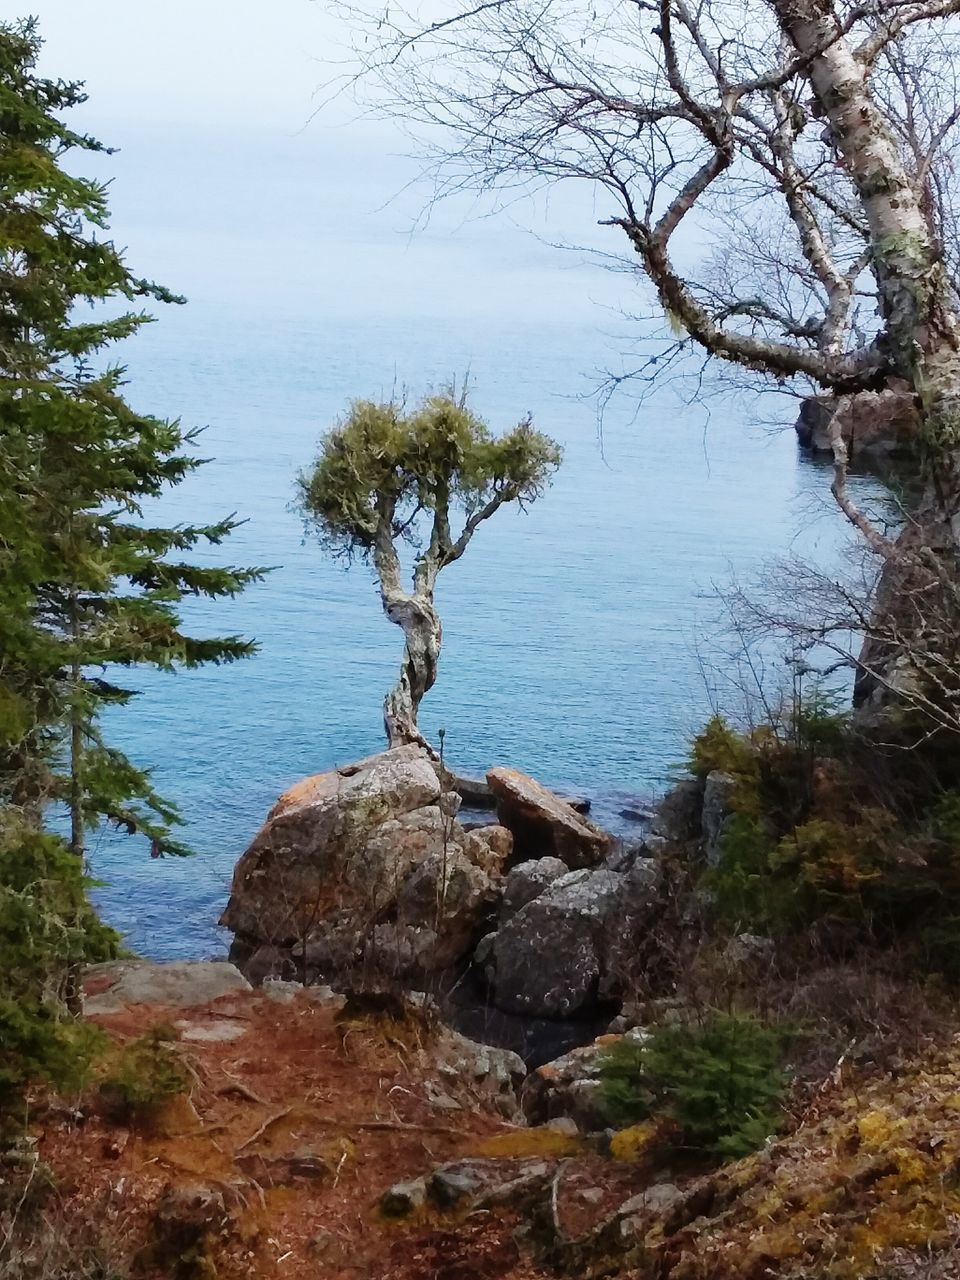 SCENIC VIEW OF ROCKS AND TREES BY LAKE